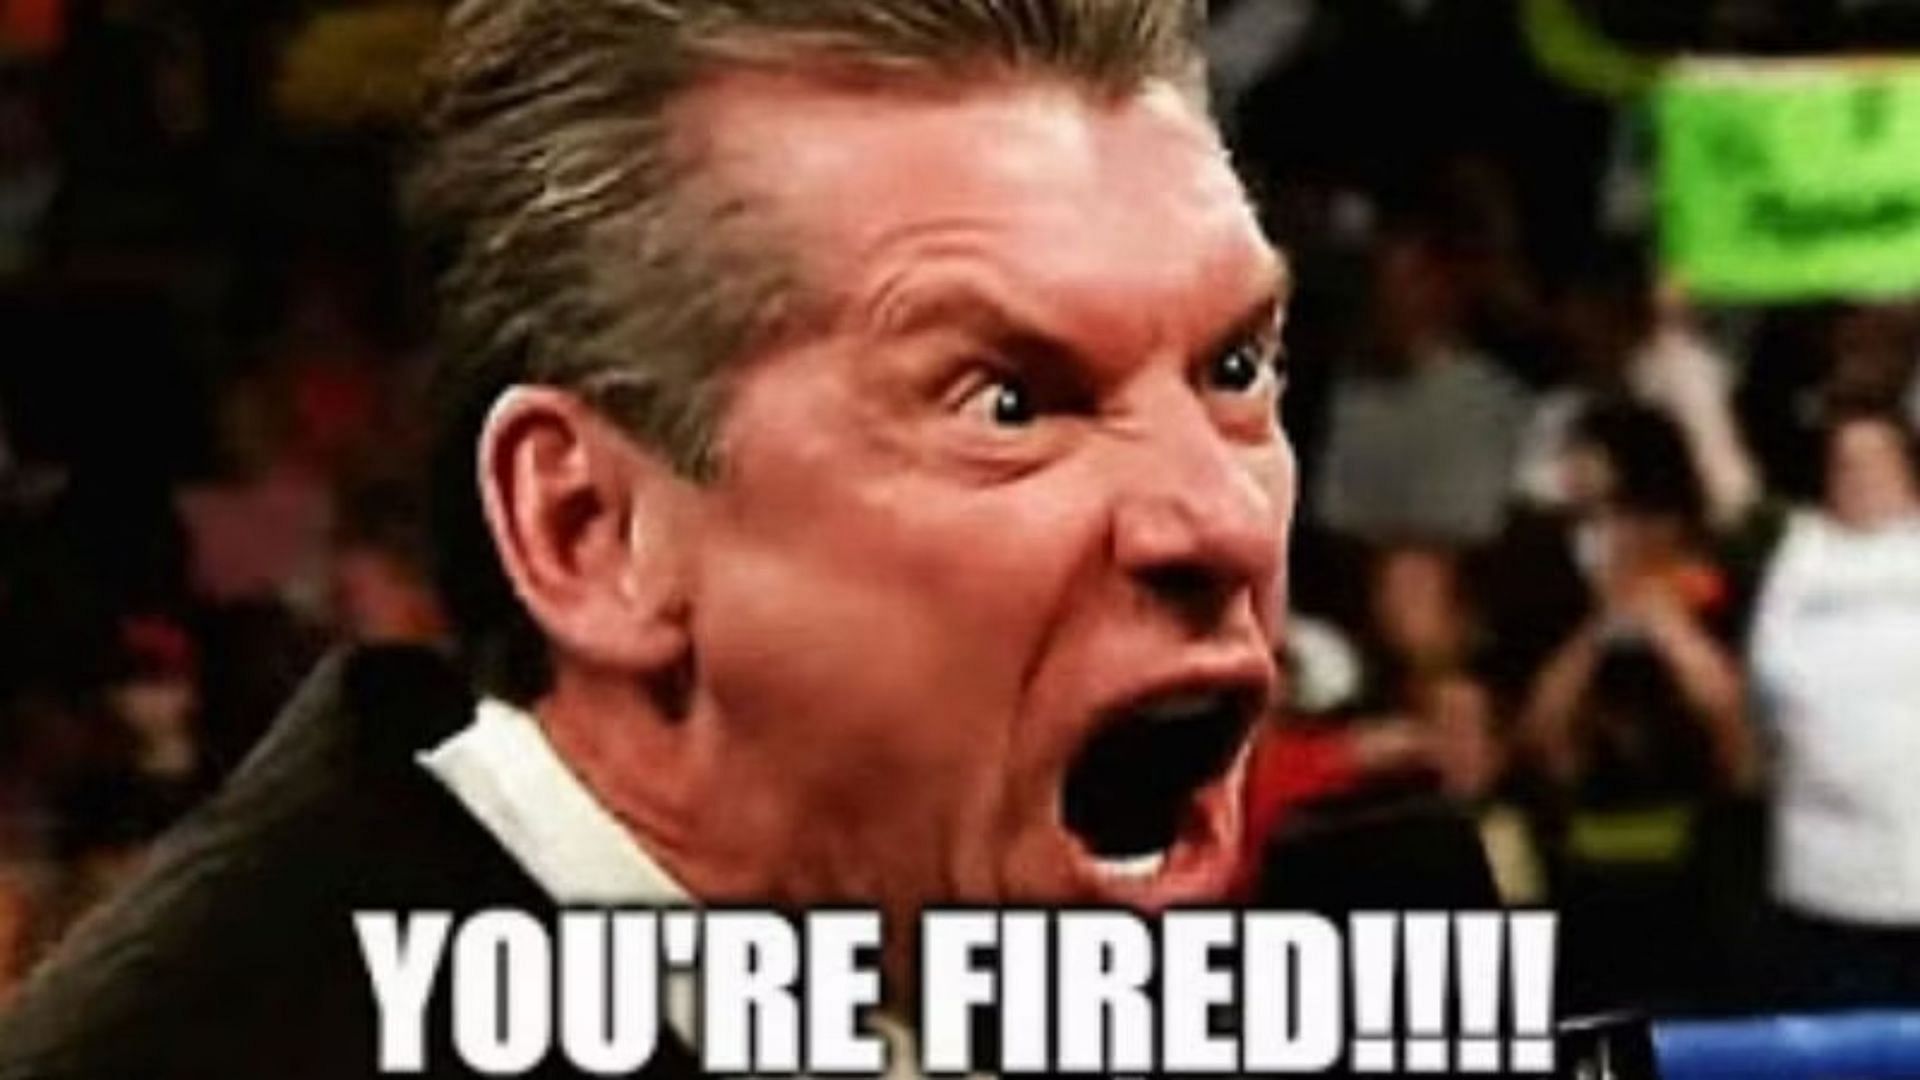 Vince McMahon was the WWE Chairman and CEO when Melina was fired